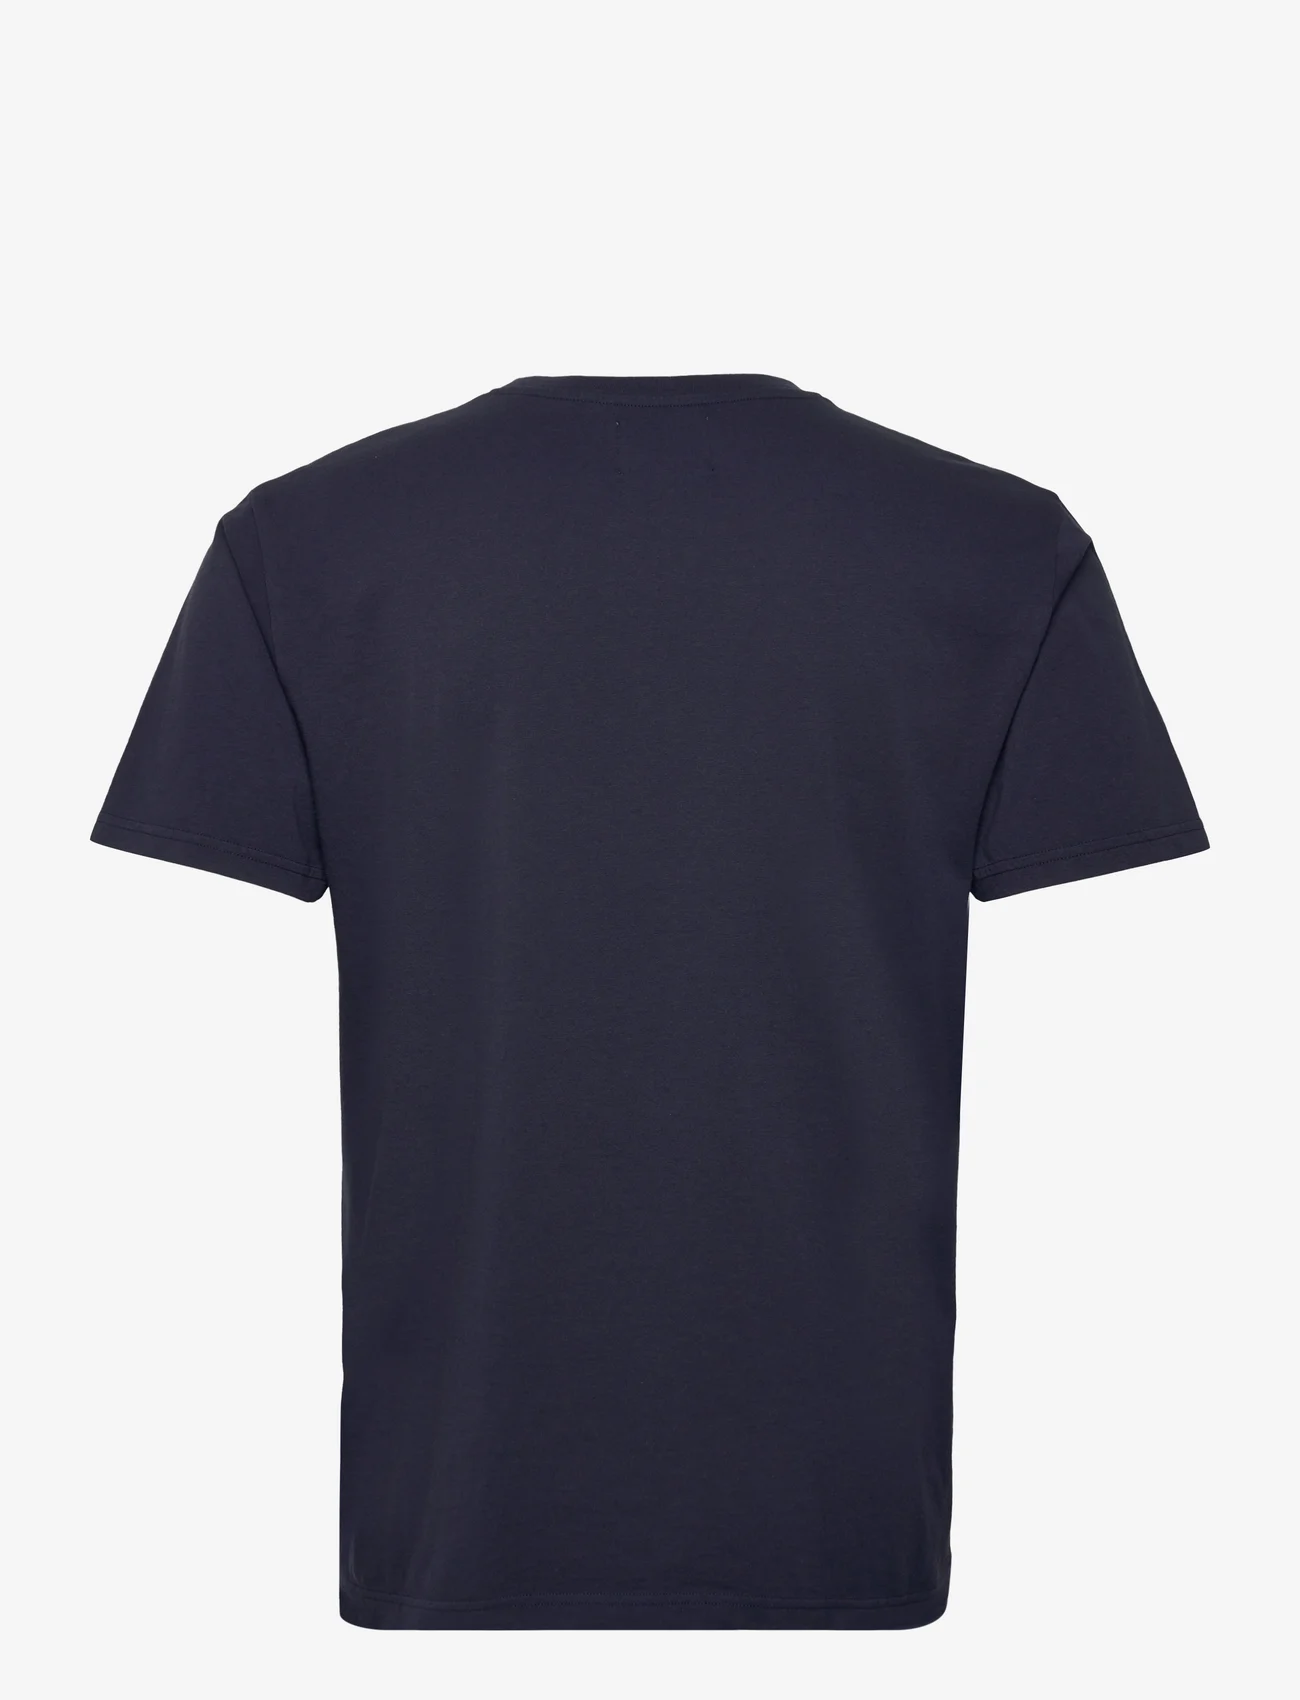 Double A by Wood Wood - Ace logo T-shirt - t-shirts - navy - 1